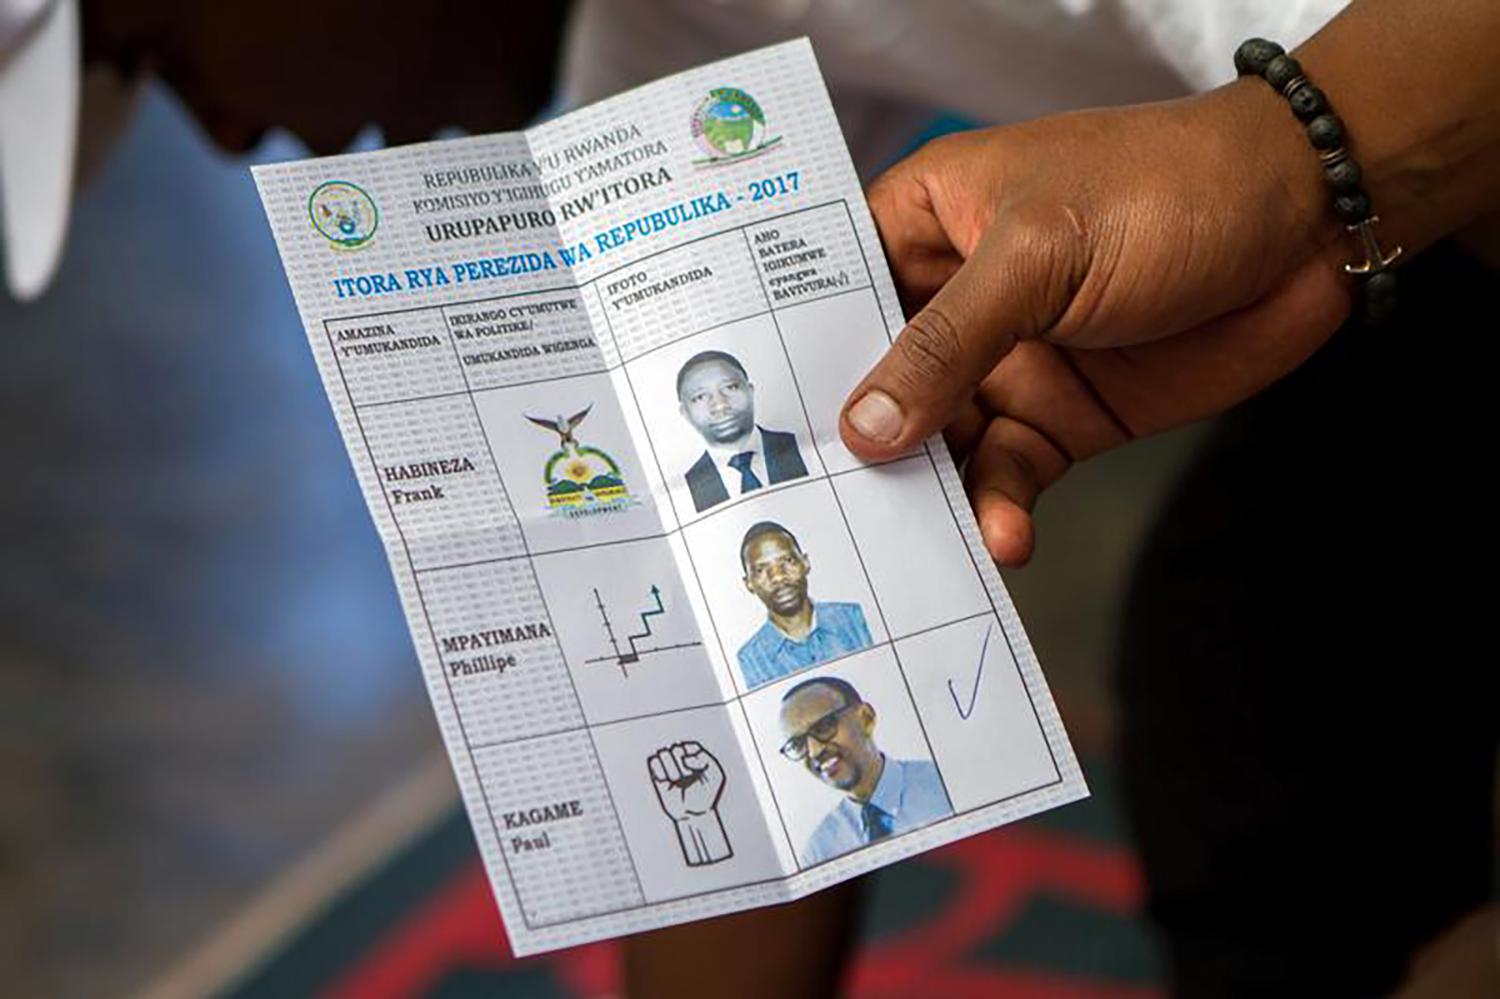 A polling staff member displays a ballot at a polling center in Kigali, Rwanda, August 4, 2017. 